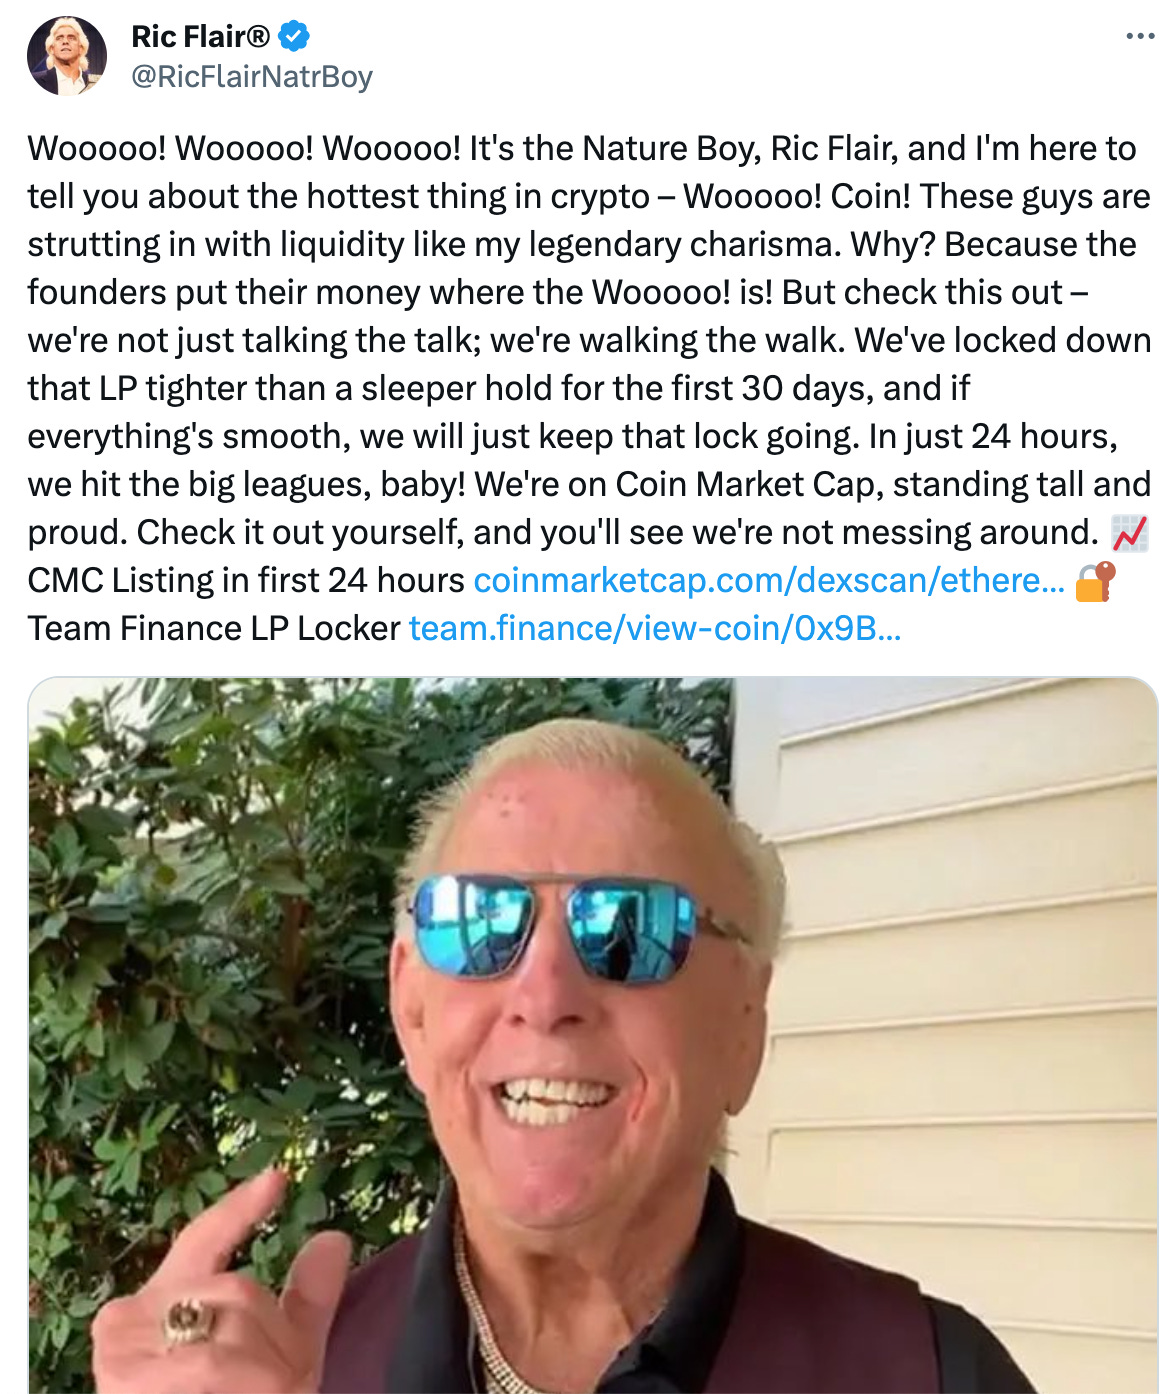 Ric Flair tweet shilling his own Nature Boy cryptocurrency 